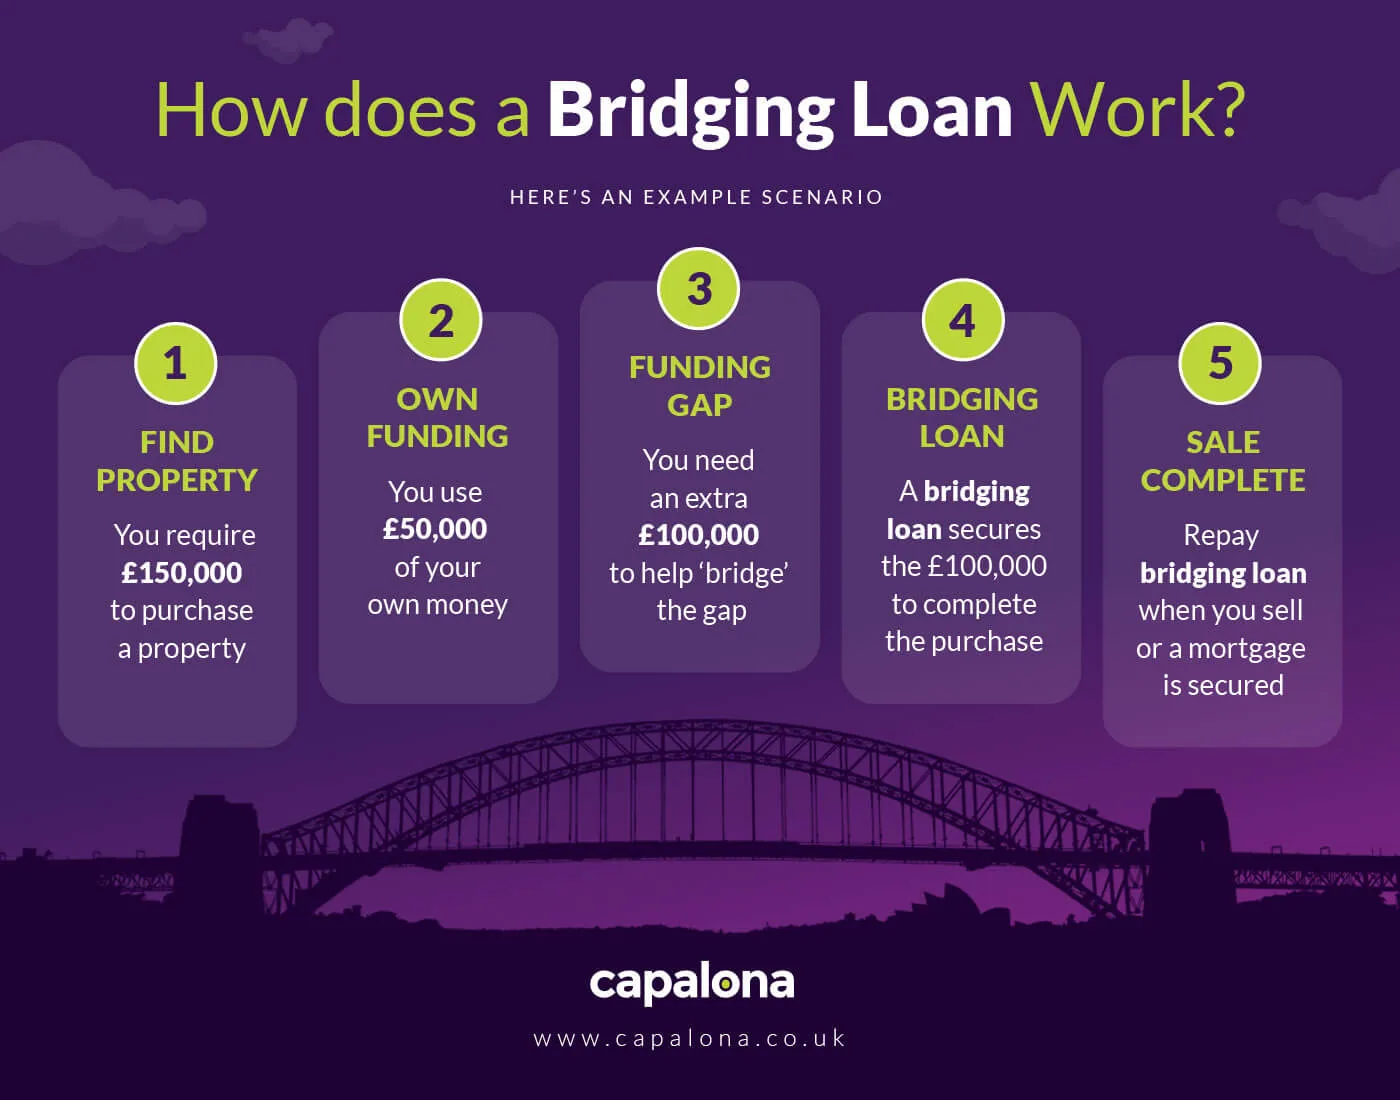 How does a bridging loan work? Explained in 5 simple steps